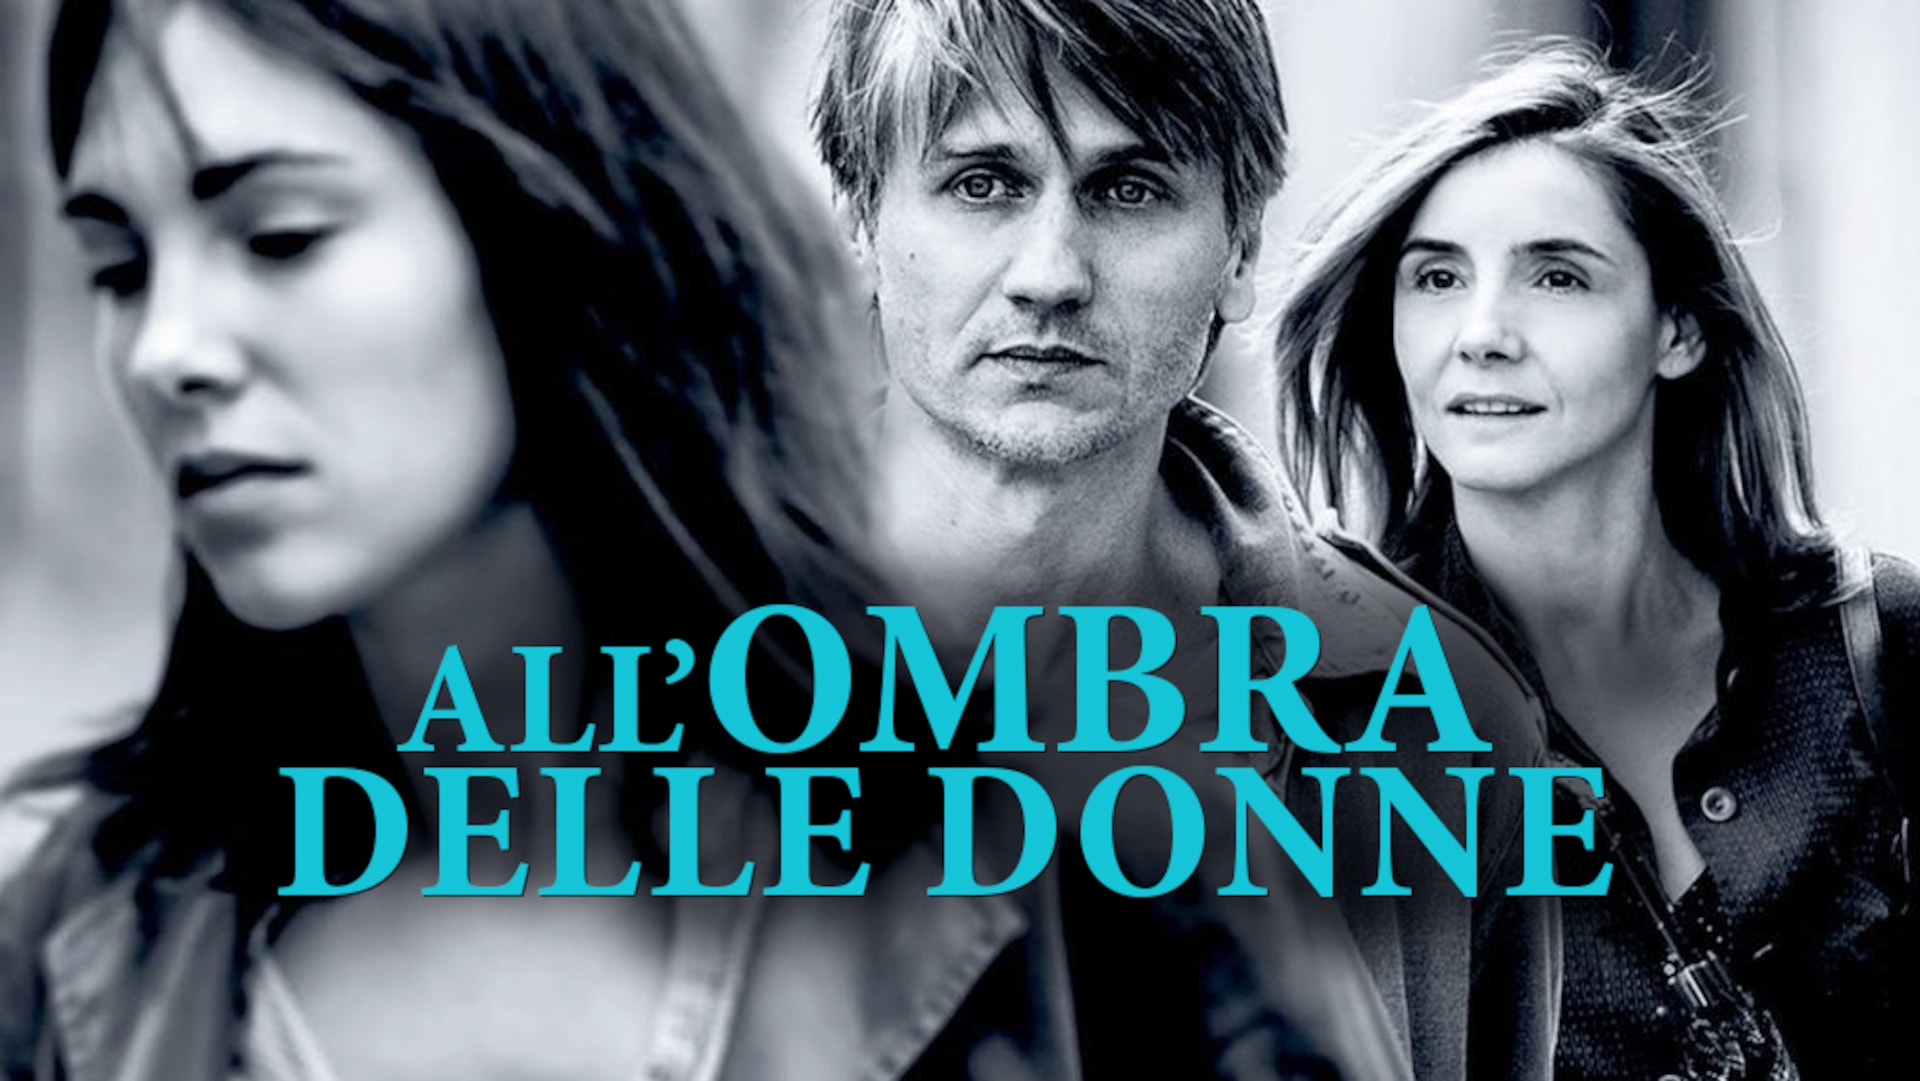 All'ombra delle donne